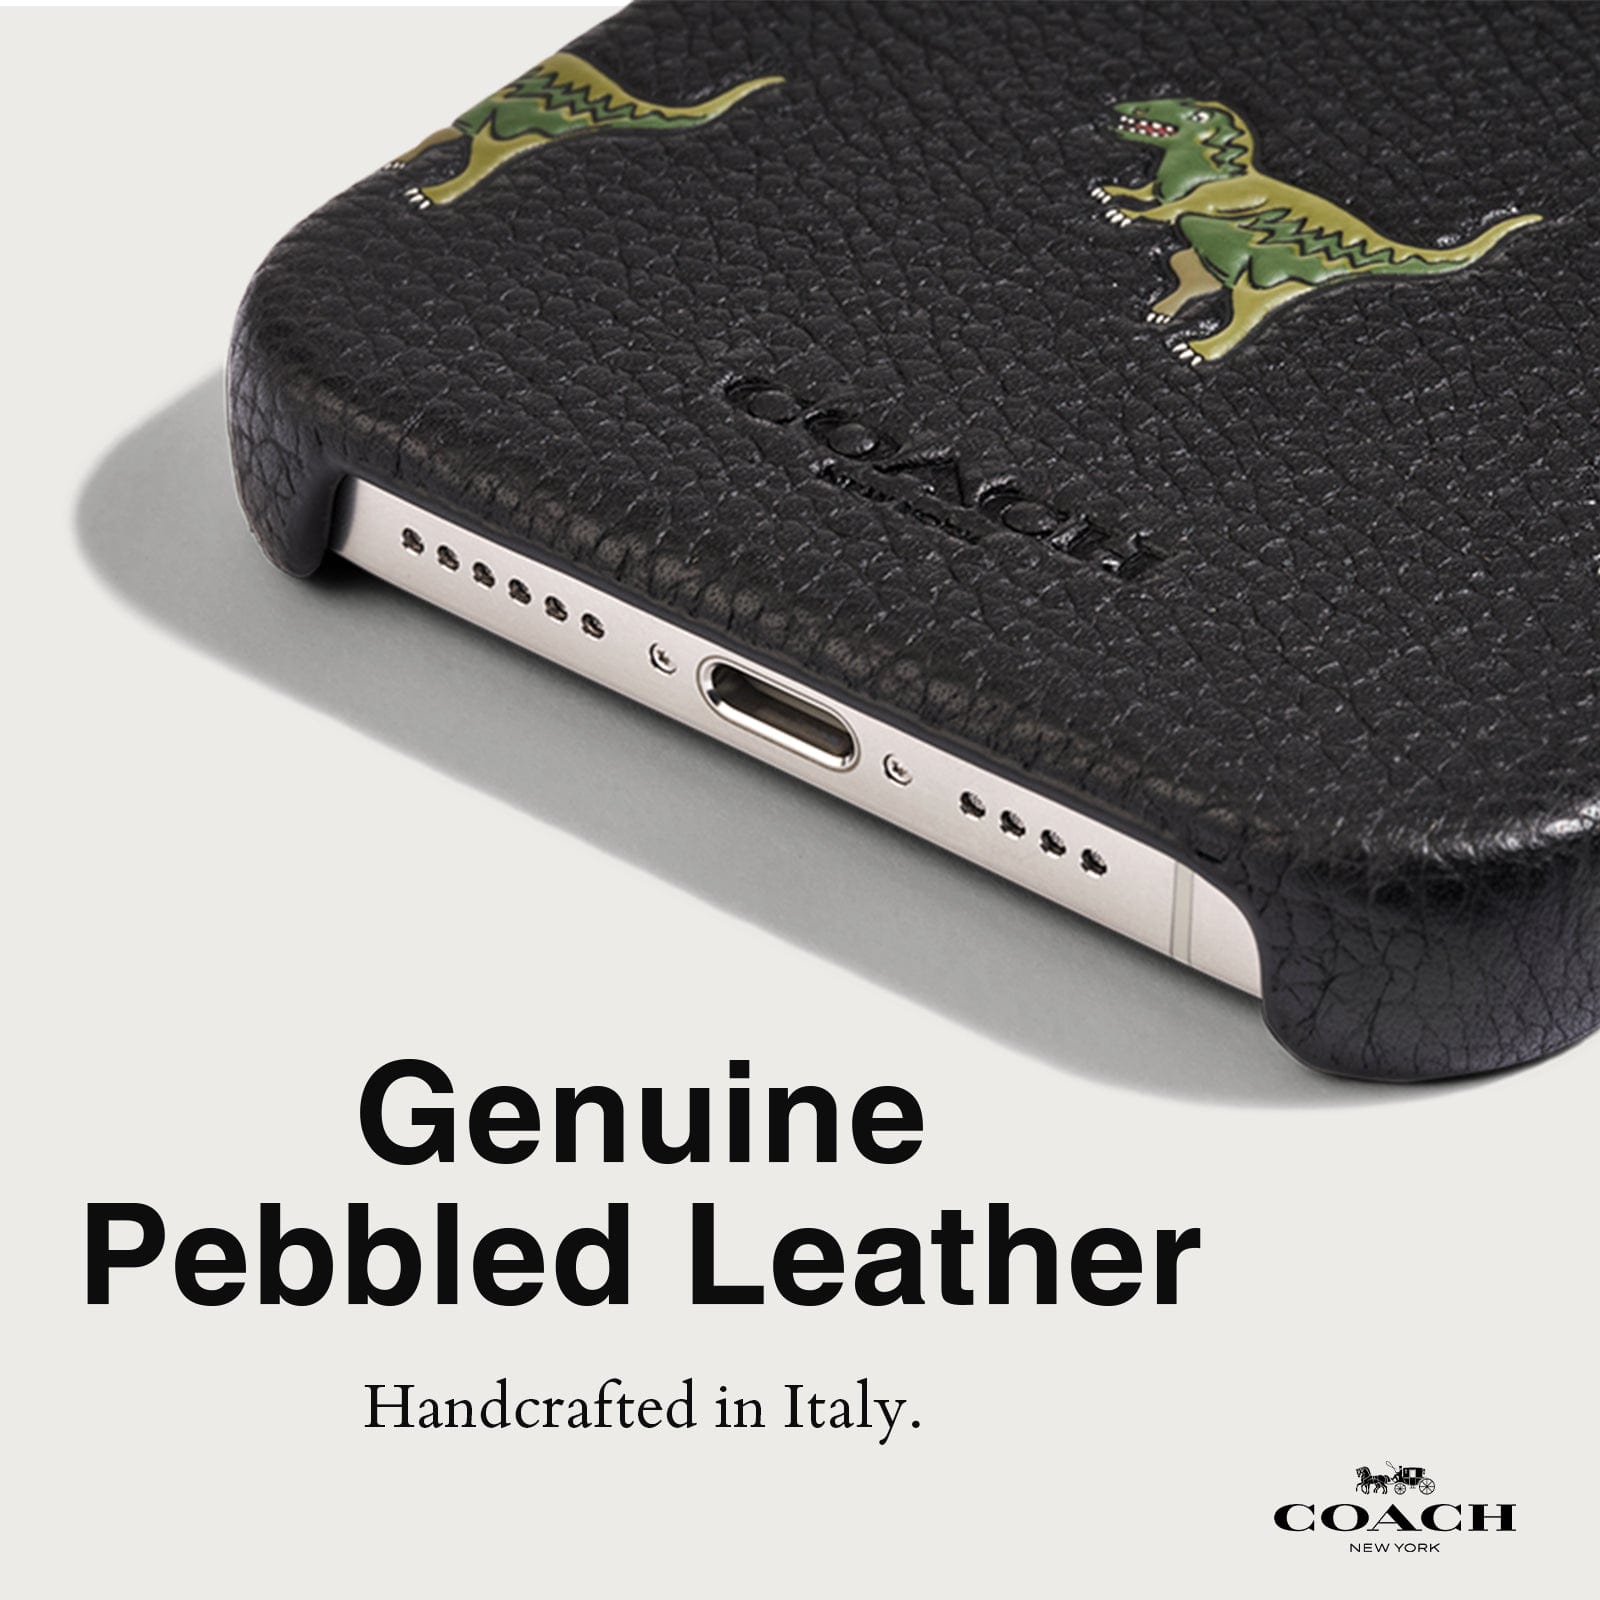 GENUINE PEBBLED LEATHER HANDCRAFTED IN ITALY